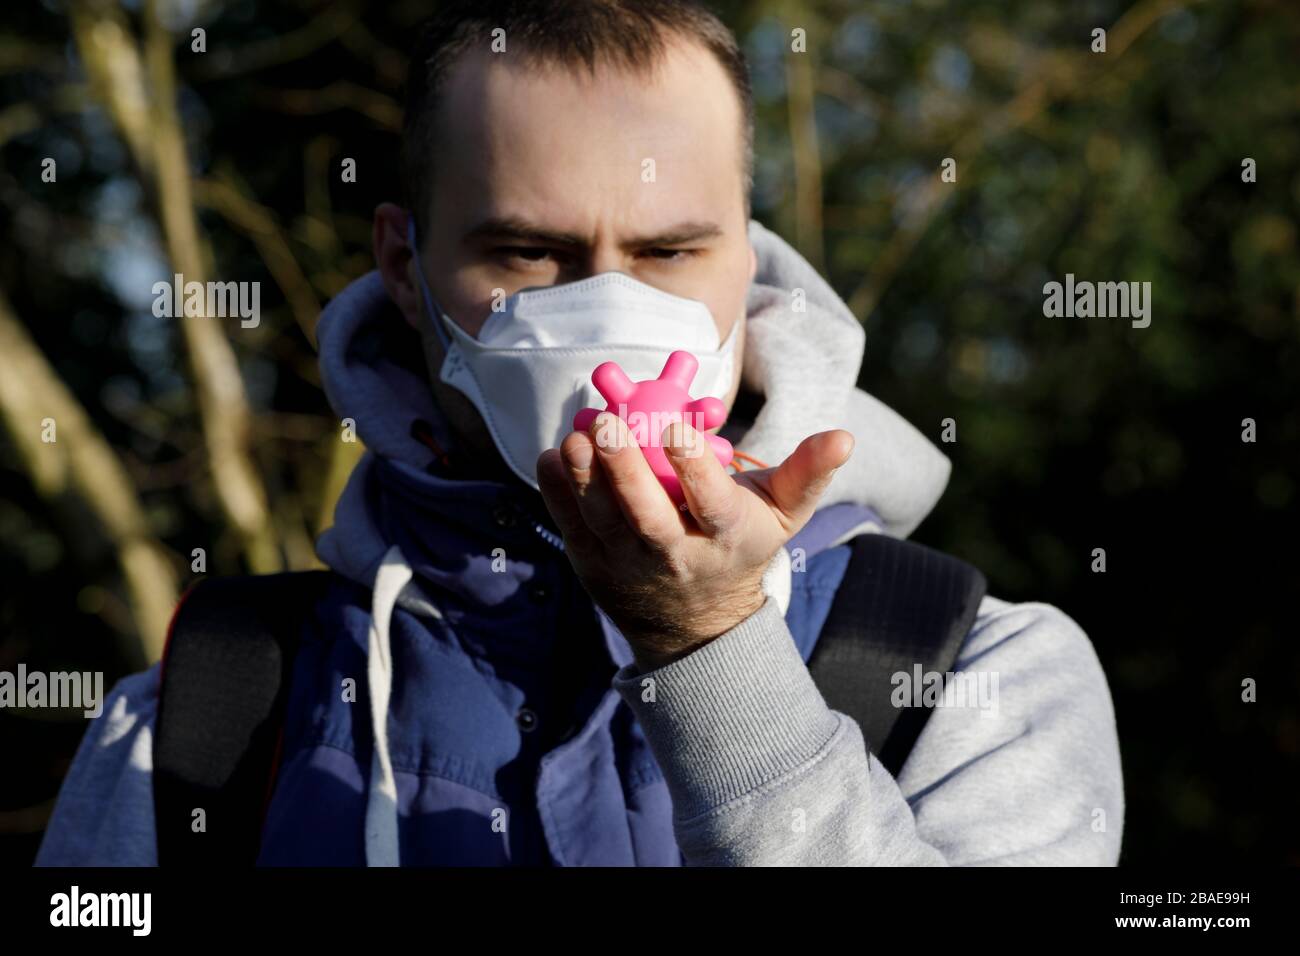 Young Adult Man Wearing a Pollution Mask to Protect himself from Corona Viruses Covid-19. Corona Virus Concept. Boy holds a covid-19 Virus on hand Stock Photo